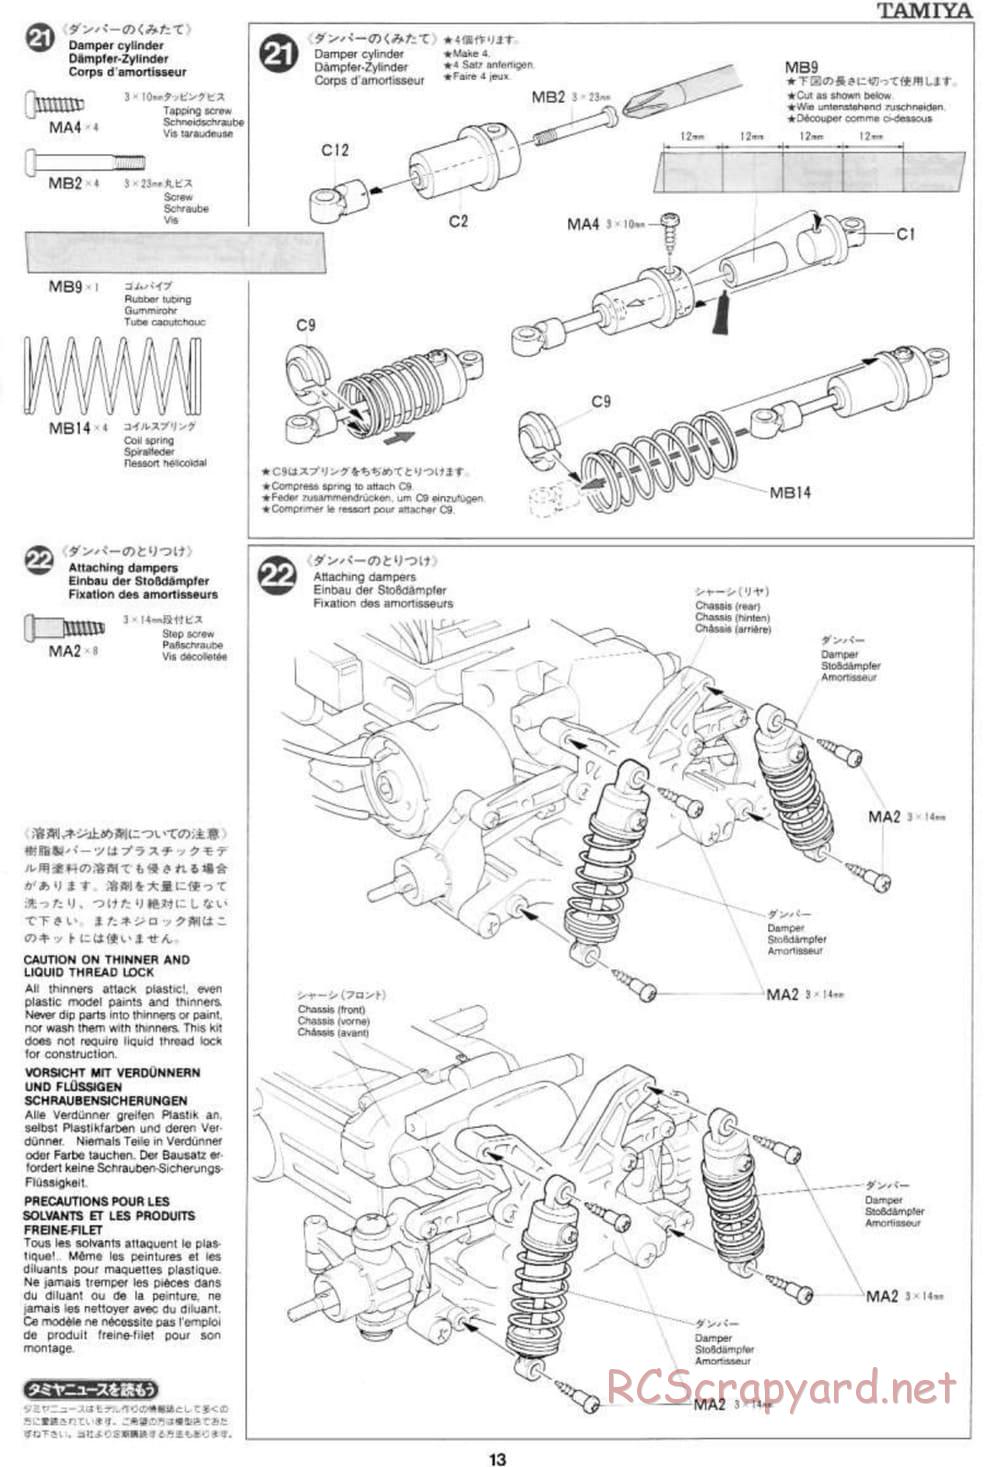 Tamiya - Toyota Celica GT-Four 97 Monte Carlo - TL-01 Chassis - Manual - Page 13